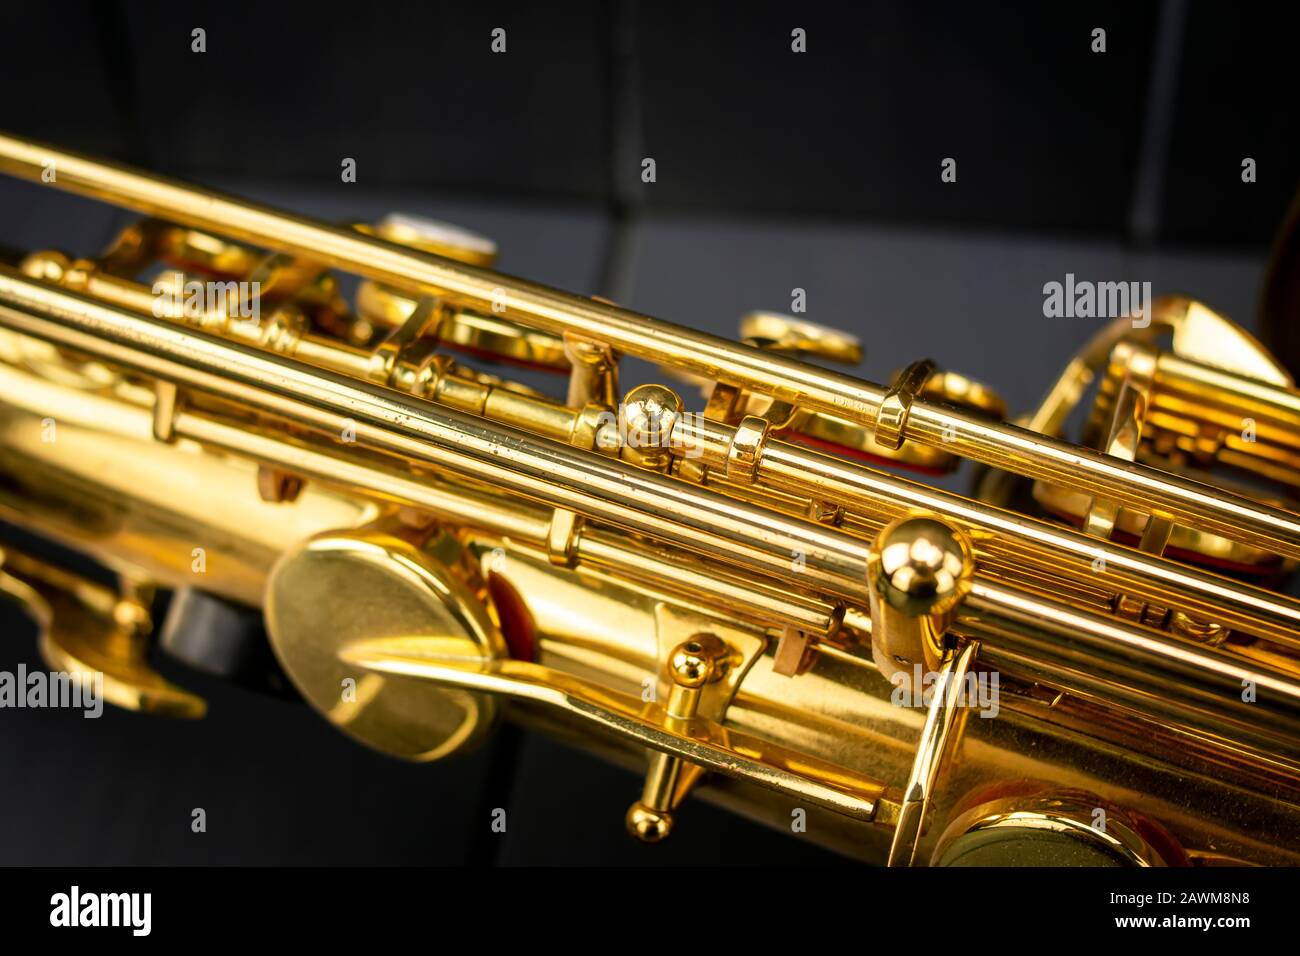 Body, rods and keys of a golden saxophone on gray wooden background Stock Photo